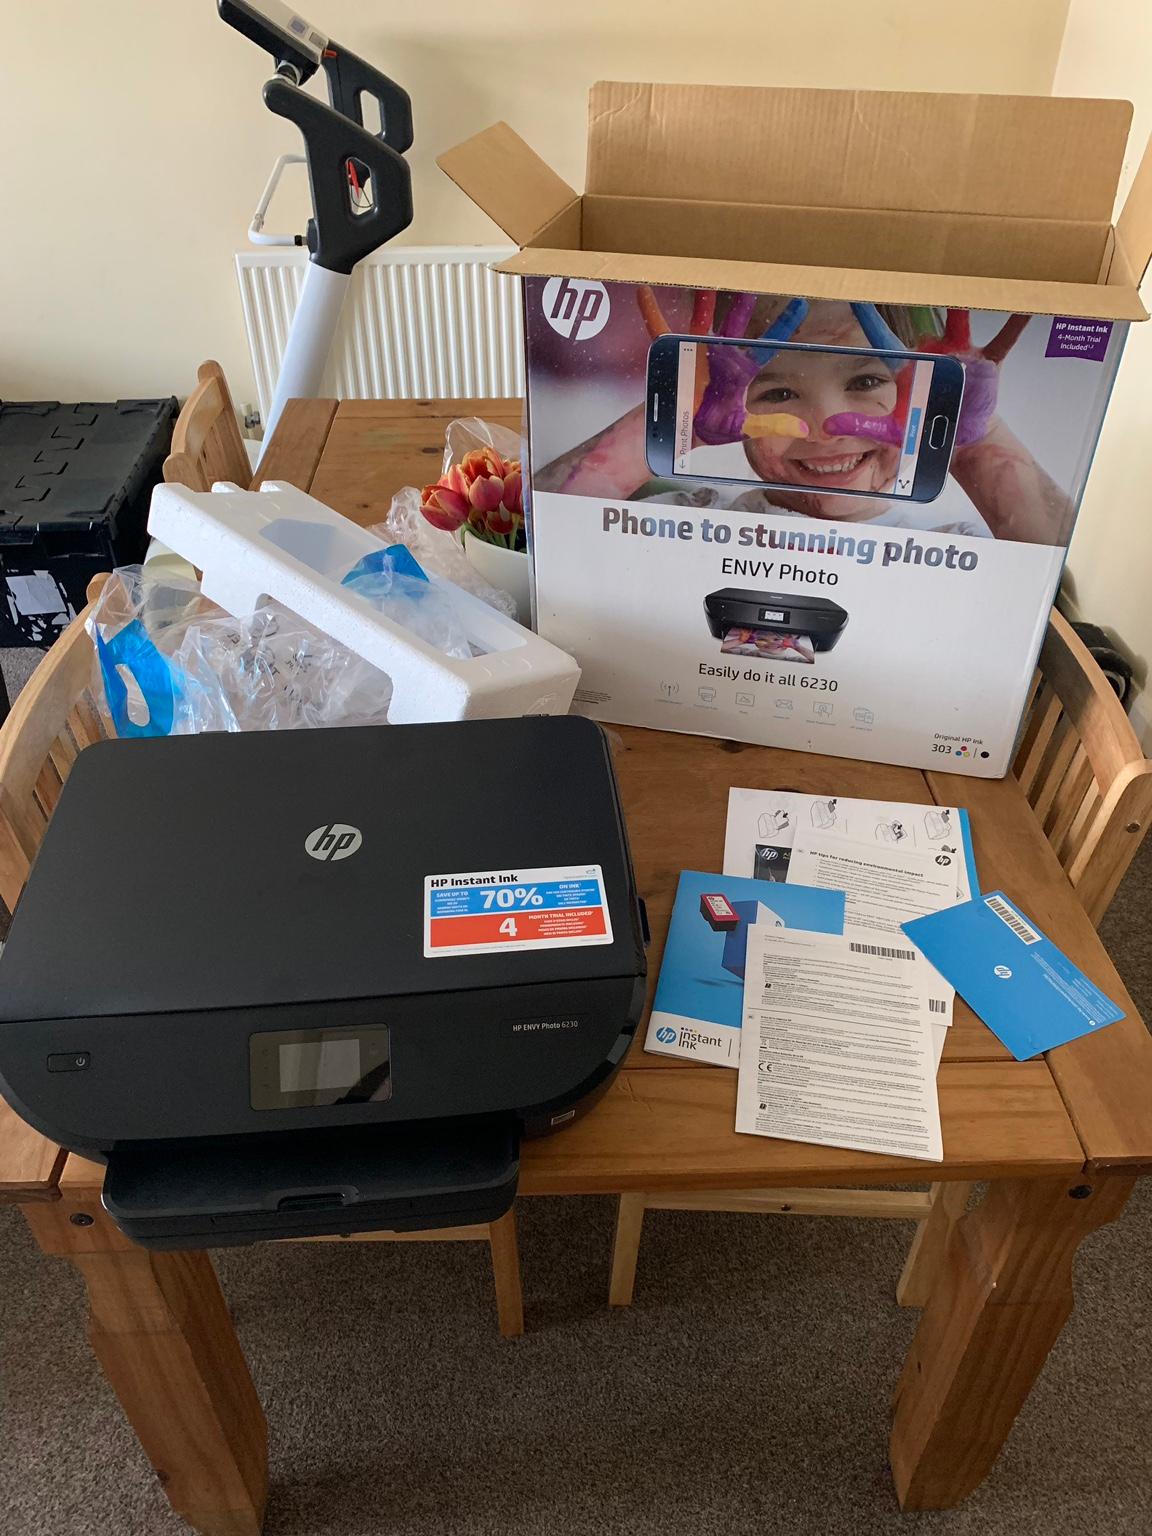 Hp Envy Photo 6230 Wireless Printer In Nw9 London For 20 00 For